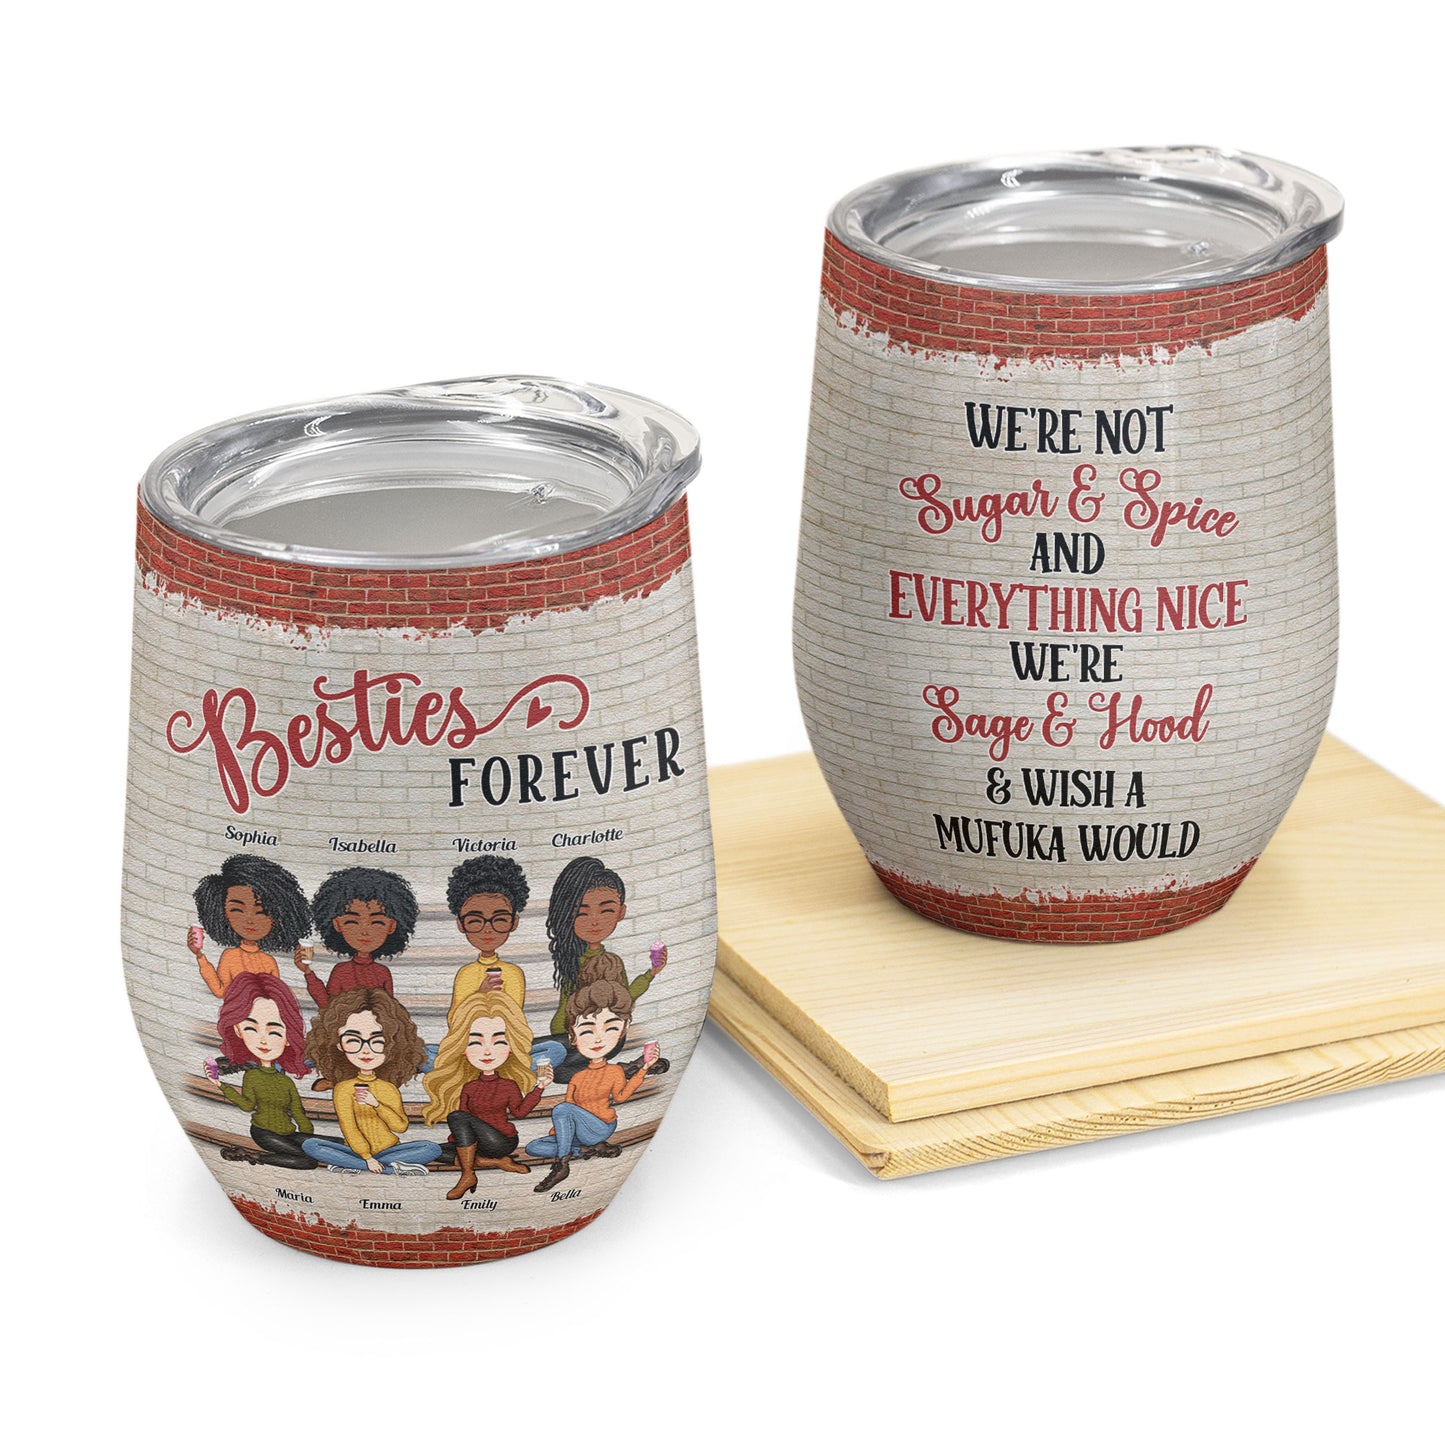 Besties Forever We're Not Sugar And Spice - Personalized Wine Tumbler - New Year Gift For Besties, BFF, Soul Sisters